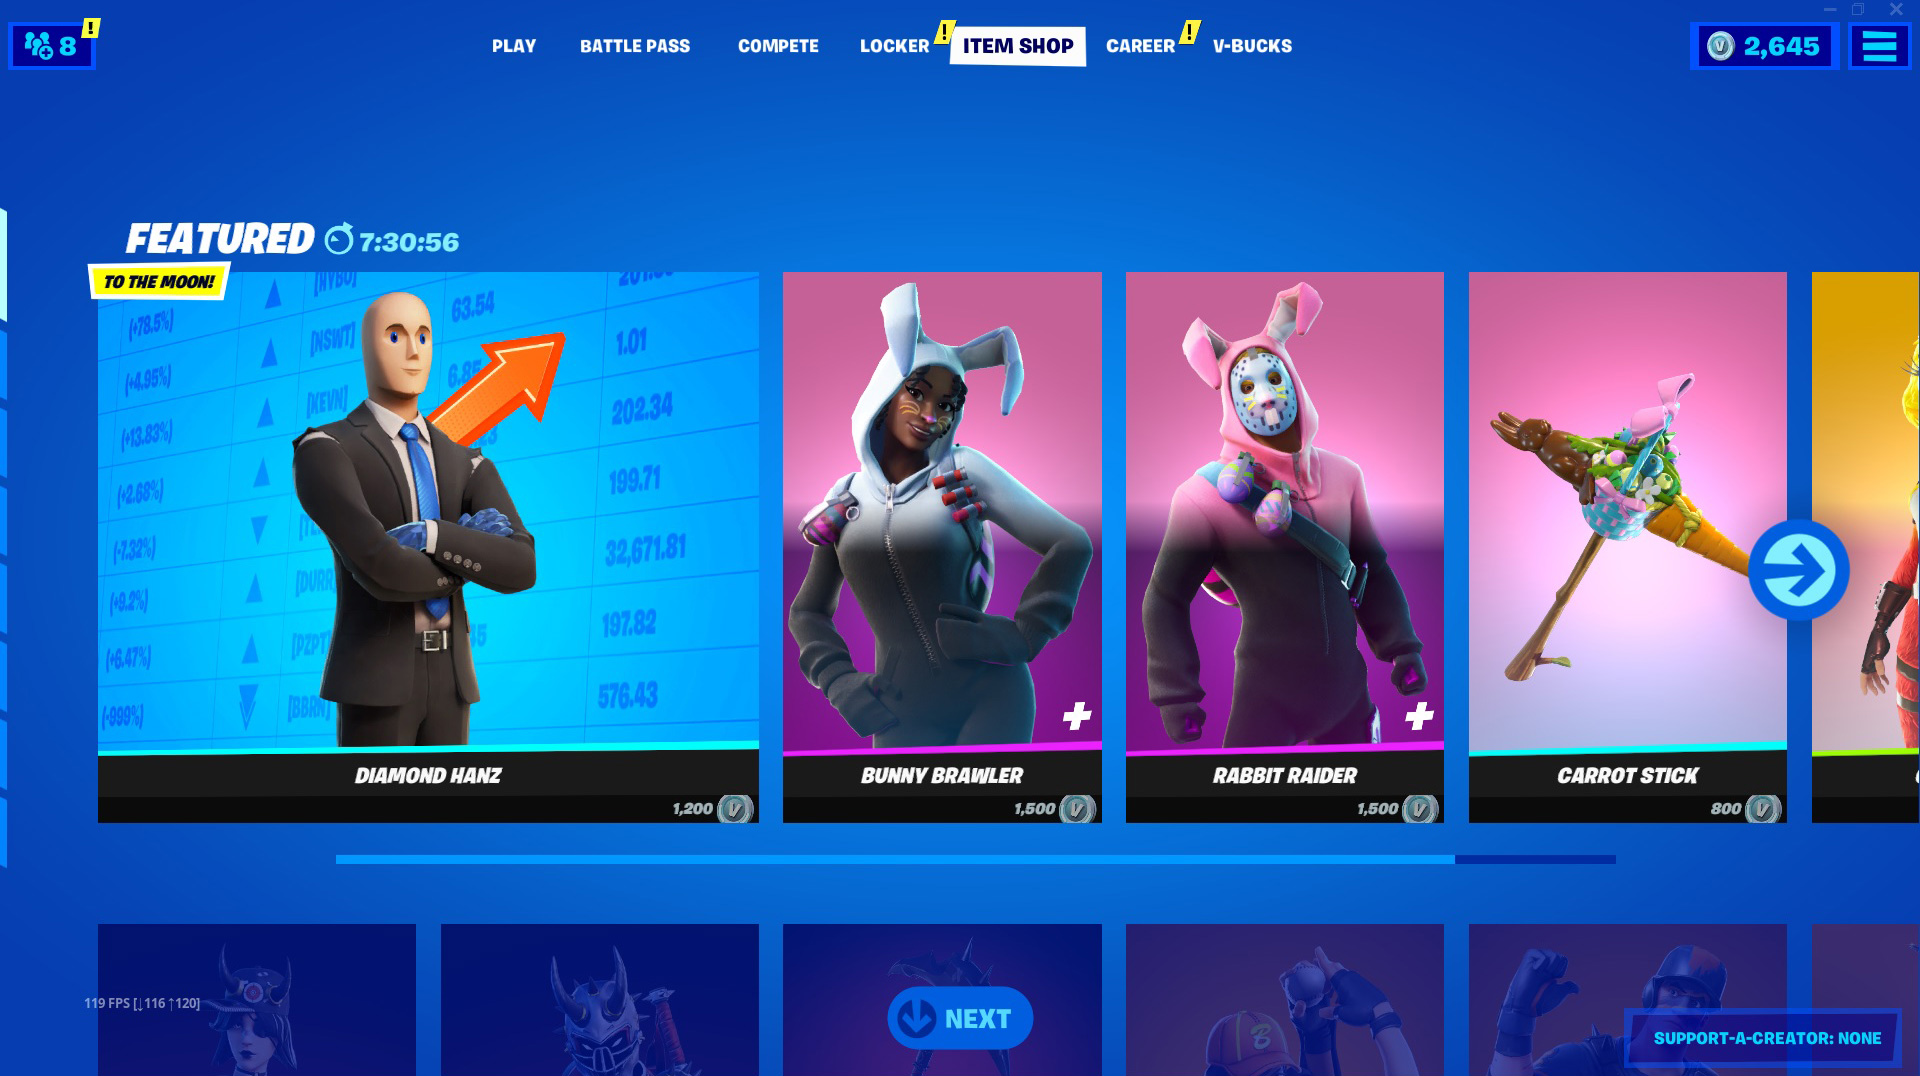 The stonk meme skin is available in the item shop